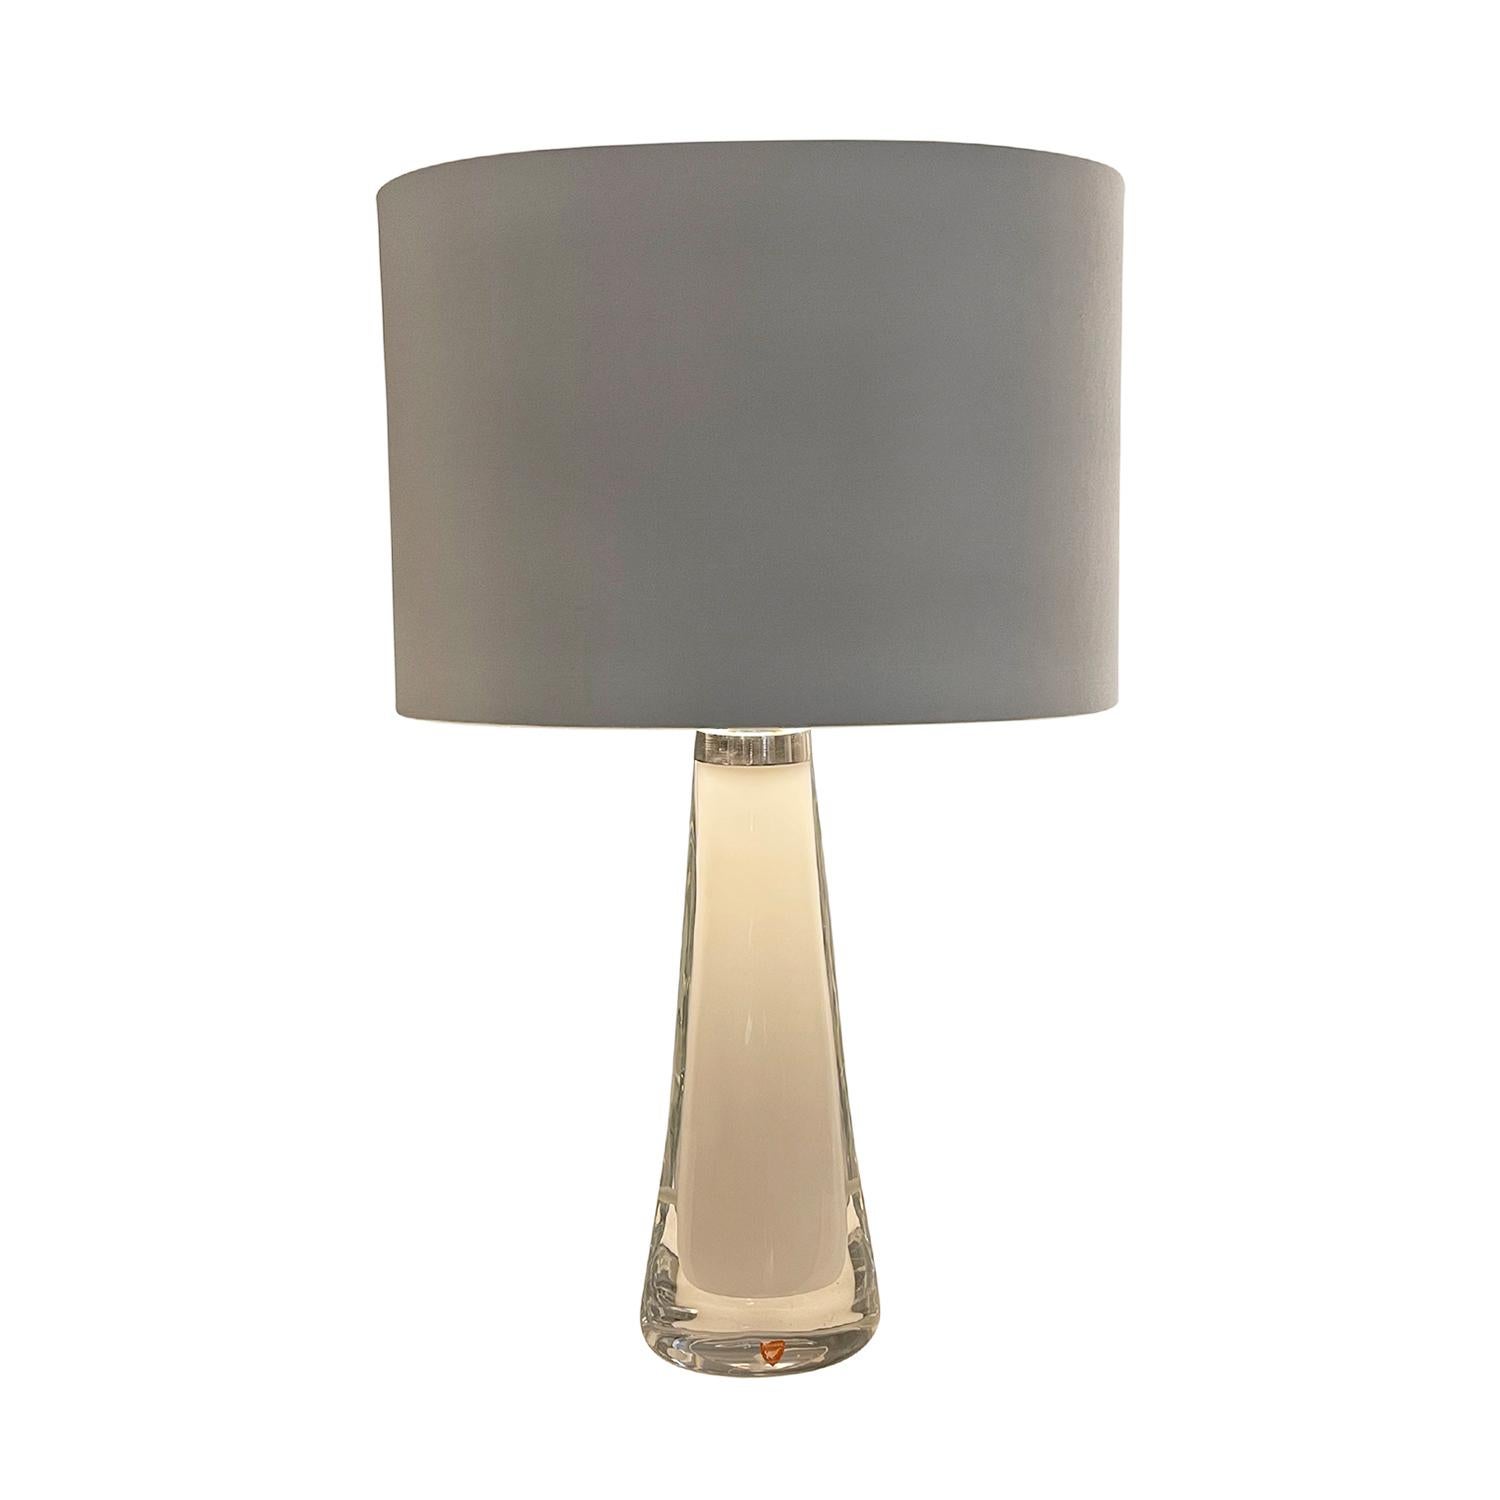 Hand-Crafted 20th Century White Swedish Orrefors Table Lamp, Desk Light by Carl Fagerlund